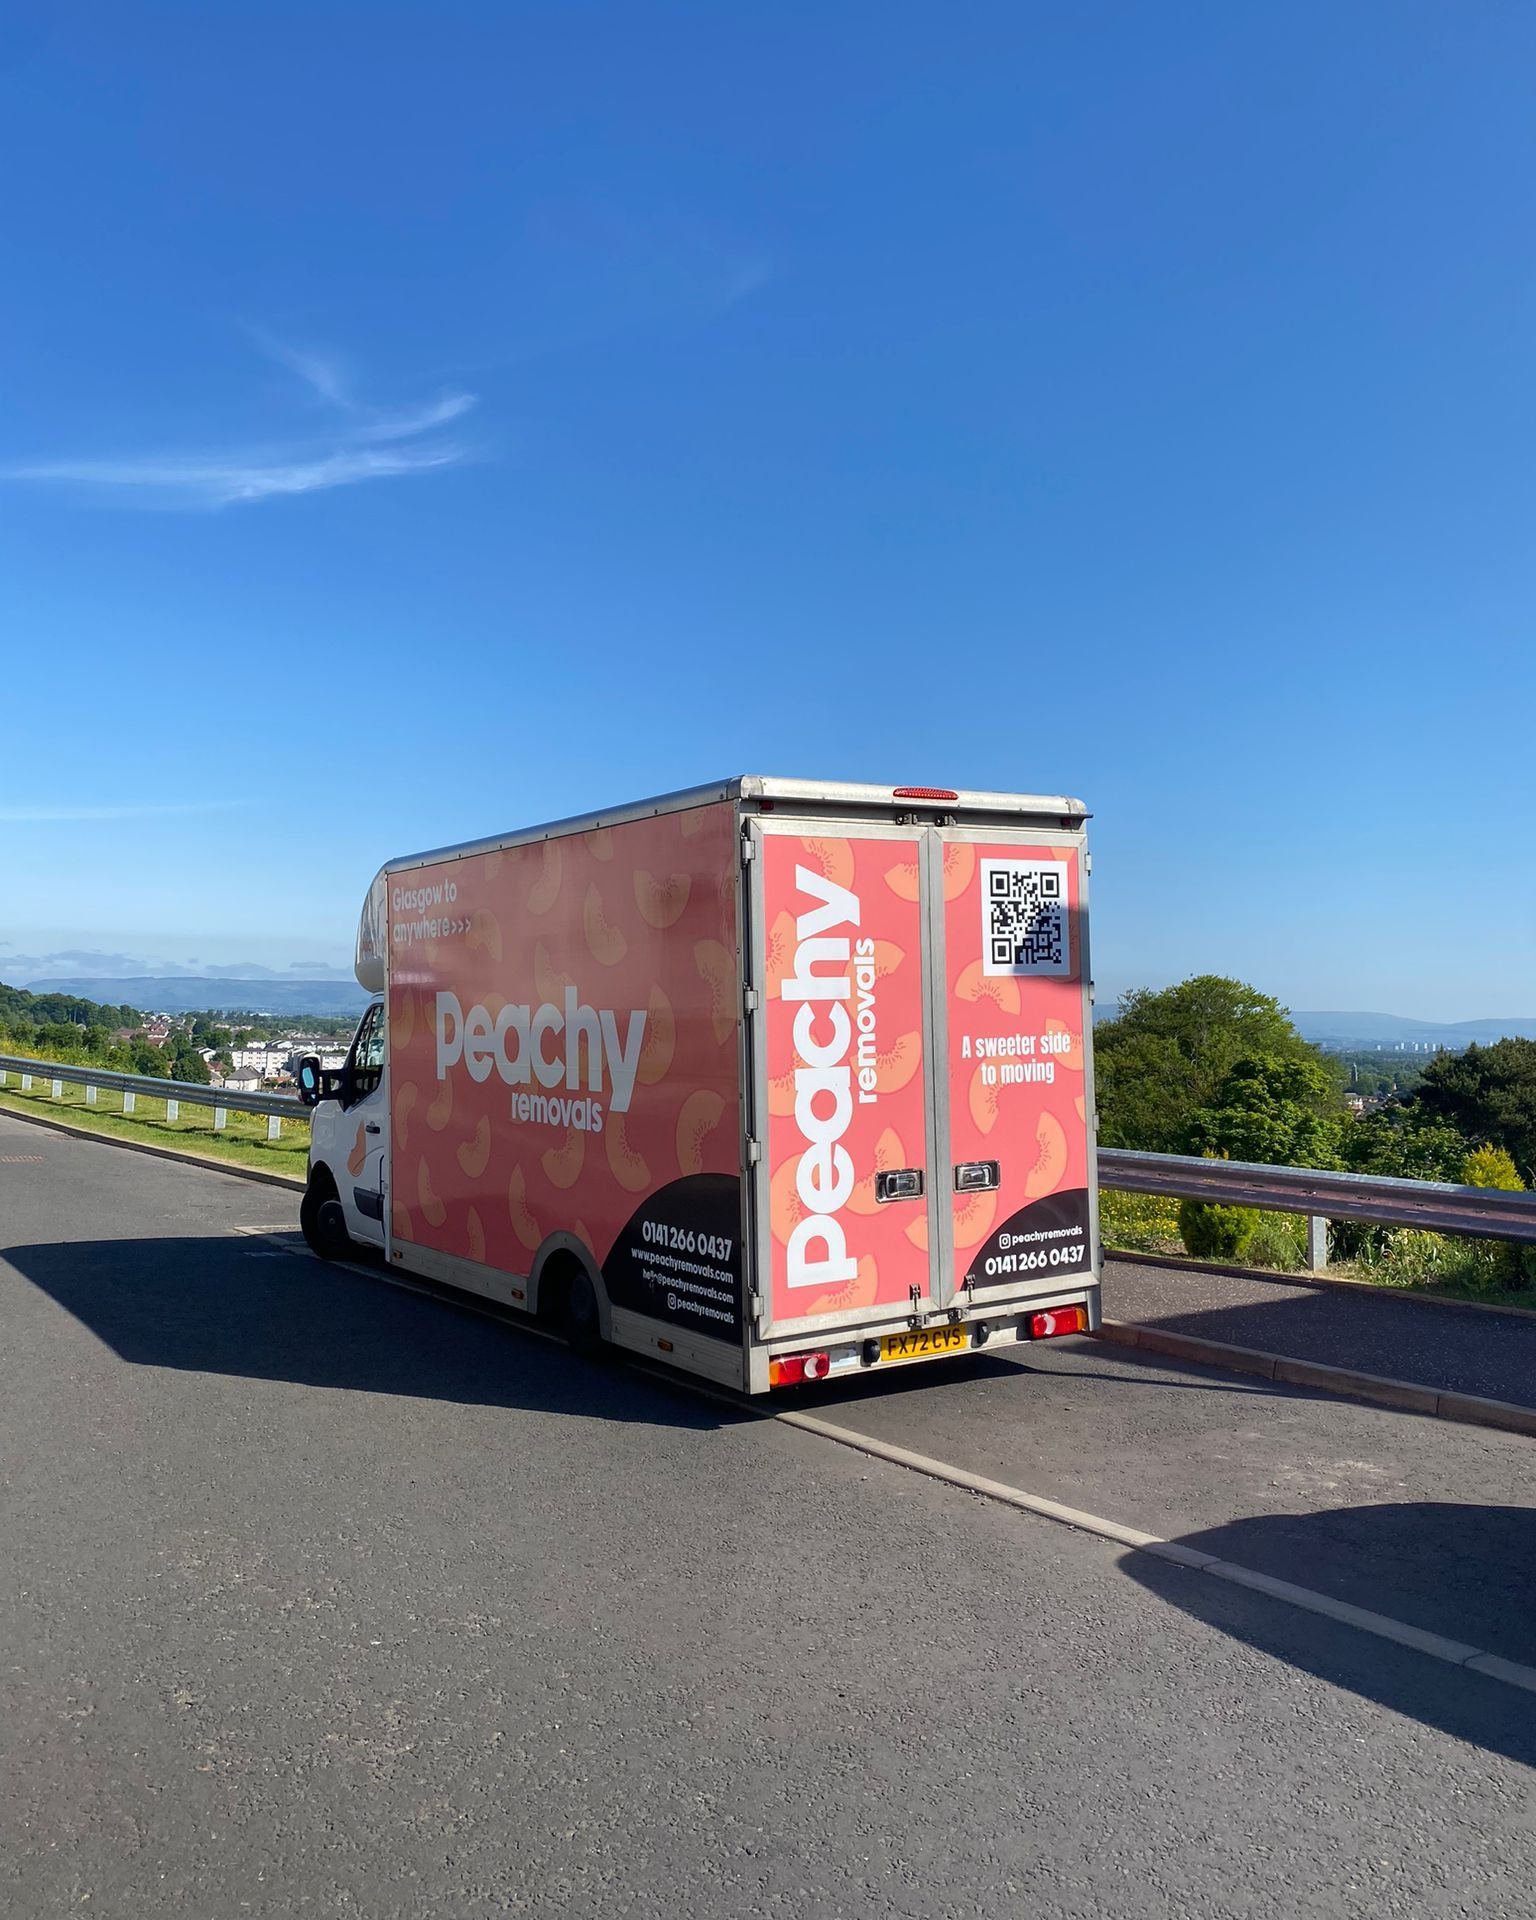 Look at Juicy living her BEST LIFE. Such incredible weather, and the house move vibes were HIGH 🙌 We've said it before, but it's the best job in the world 🫶🍑✨
.
.
.
.
.
#housemove #removals #removalscompany #professionalmovers #peachy #movingandst